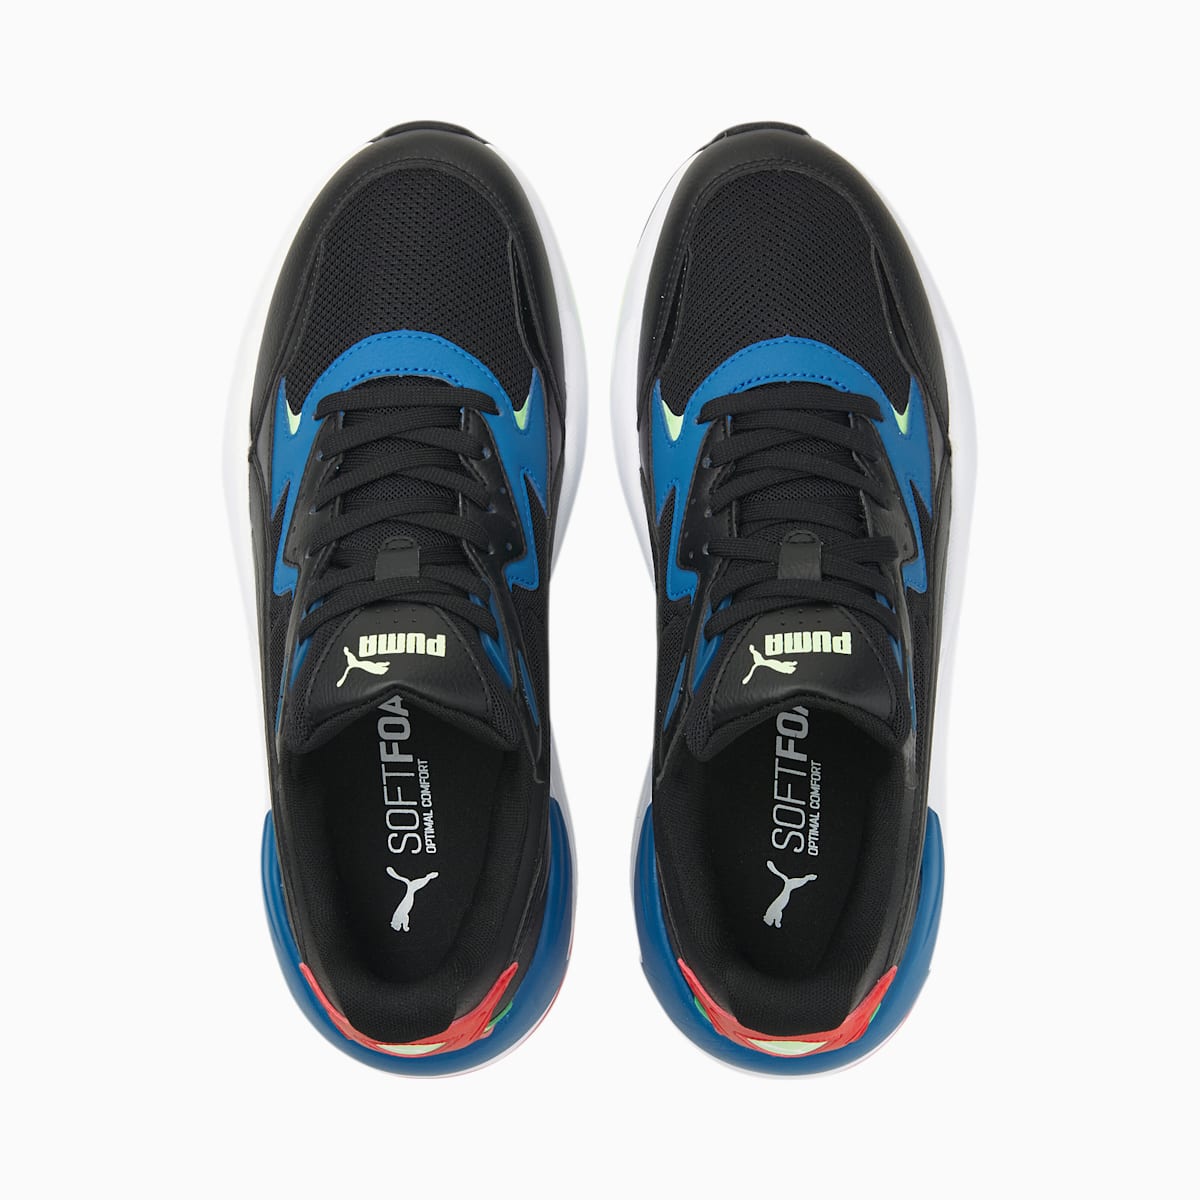 Puma X-Ray Speed Outlet - Tenis Mujer Negros/Azules/Verdes